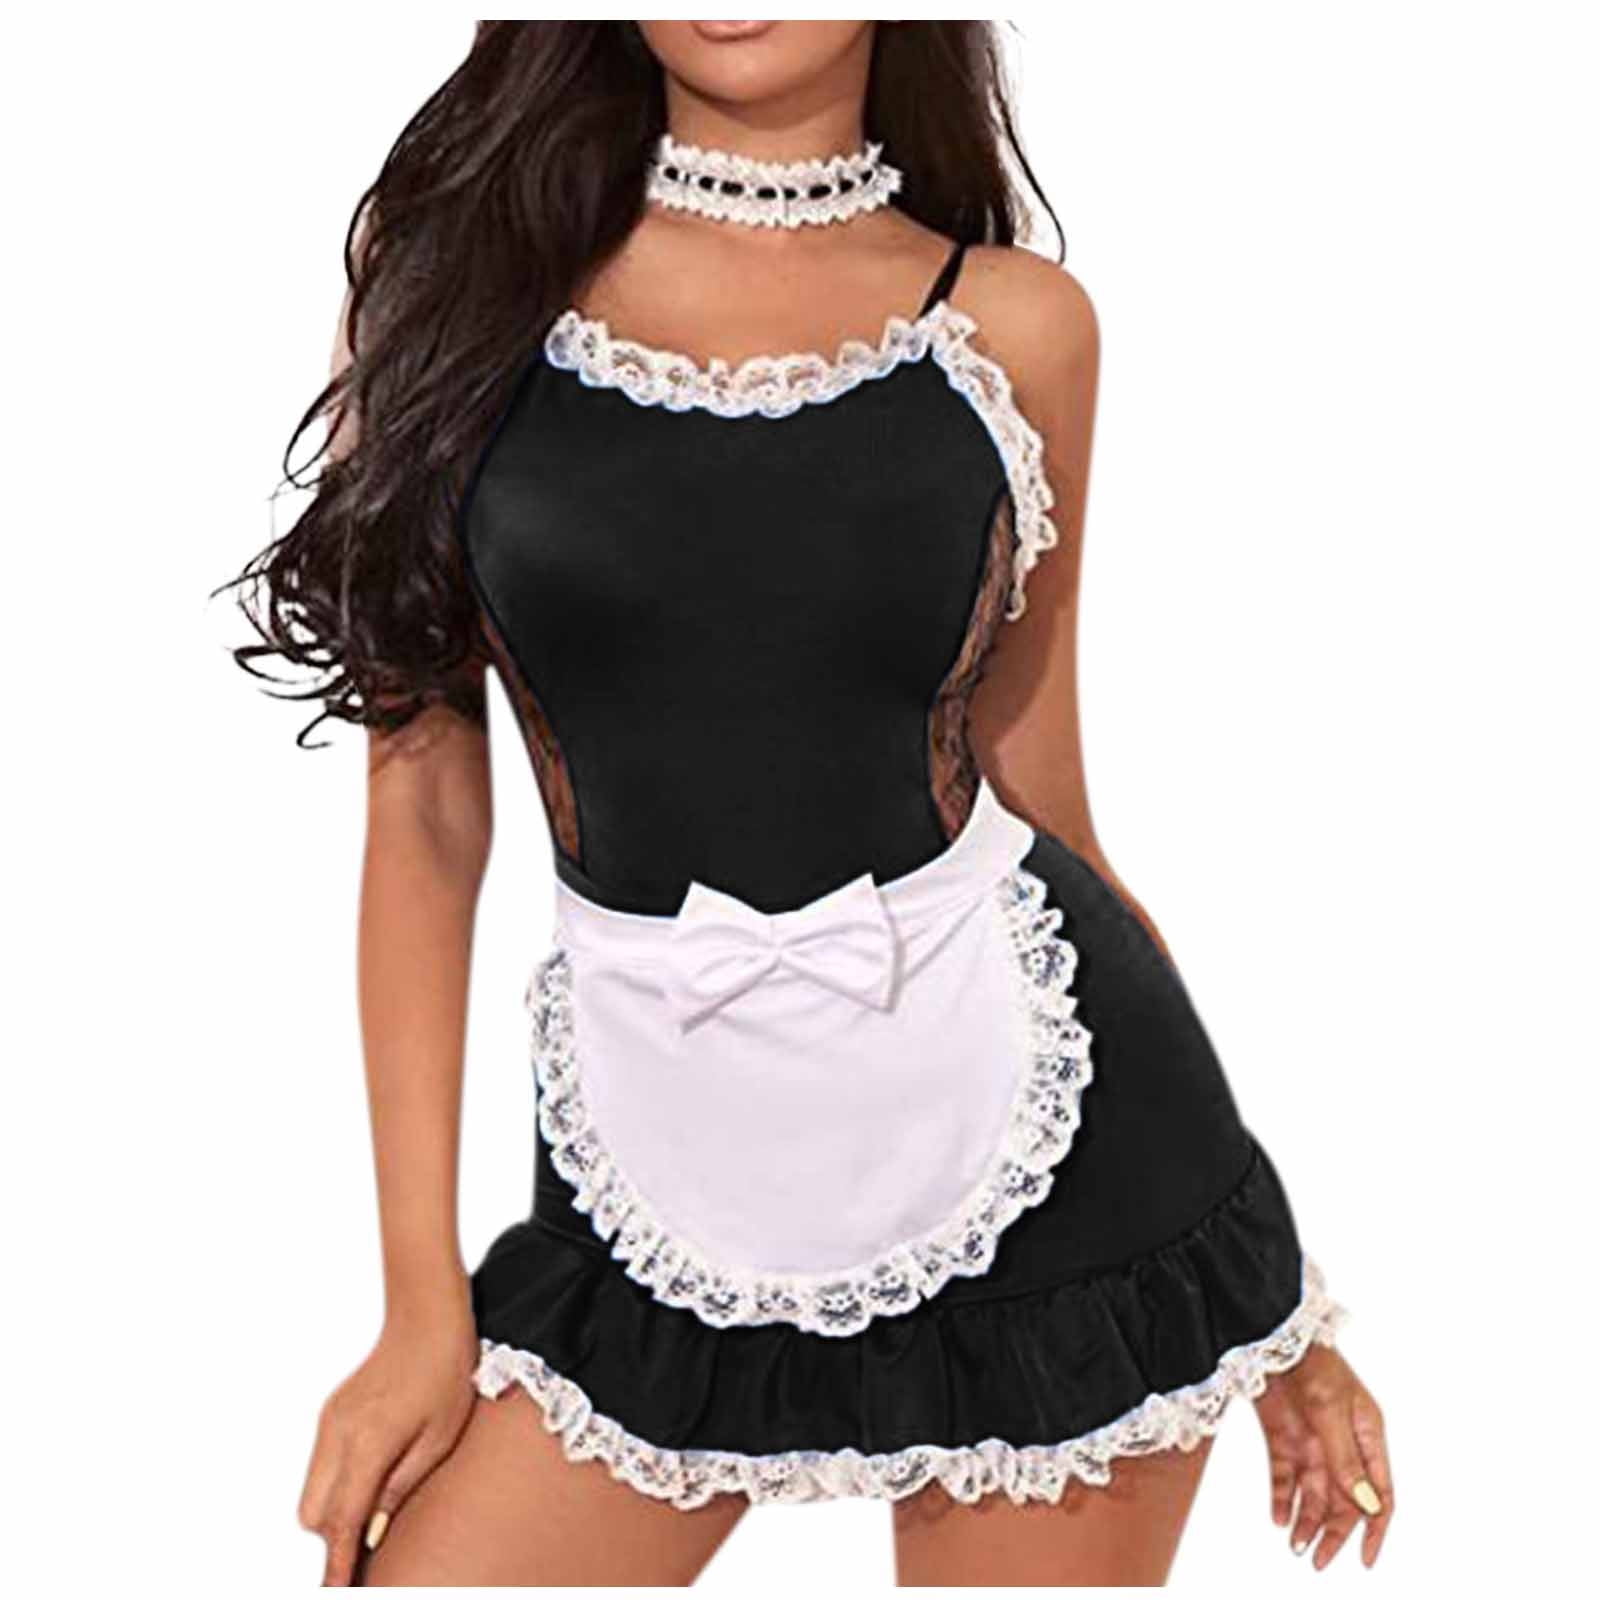 Sexy Lingerie Outfits Frisky French Maid Sexy Costume For Women ...